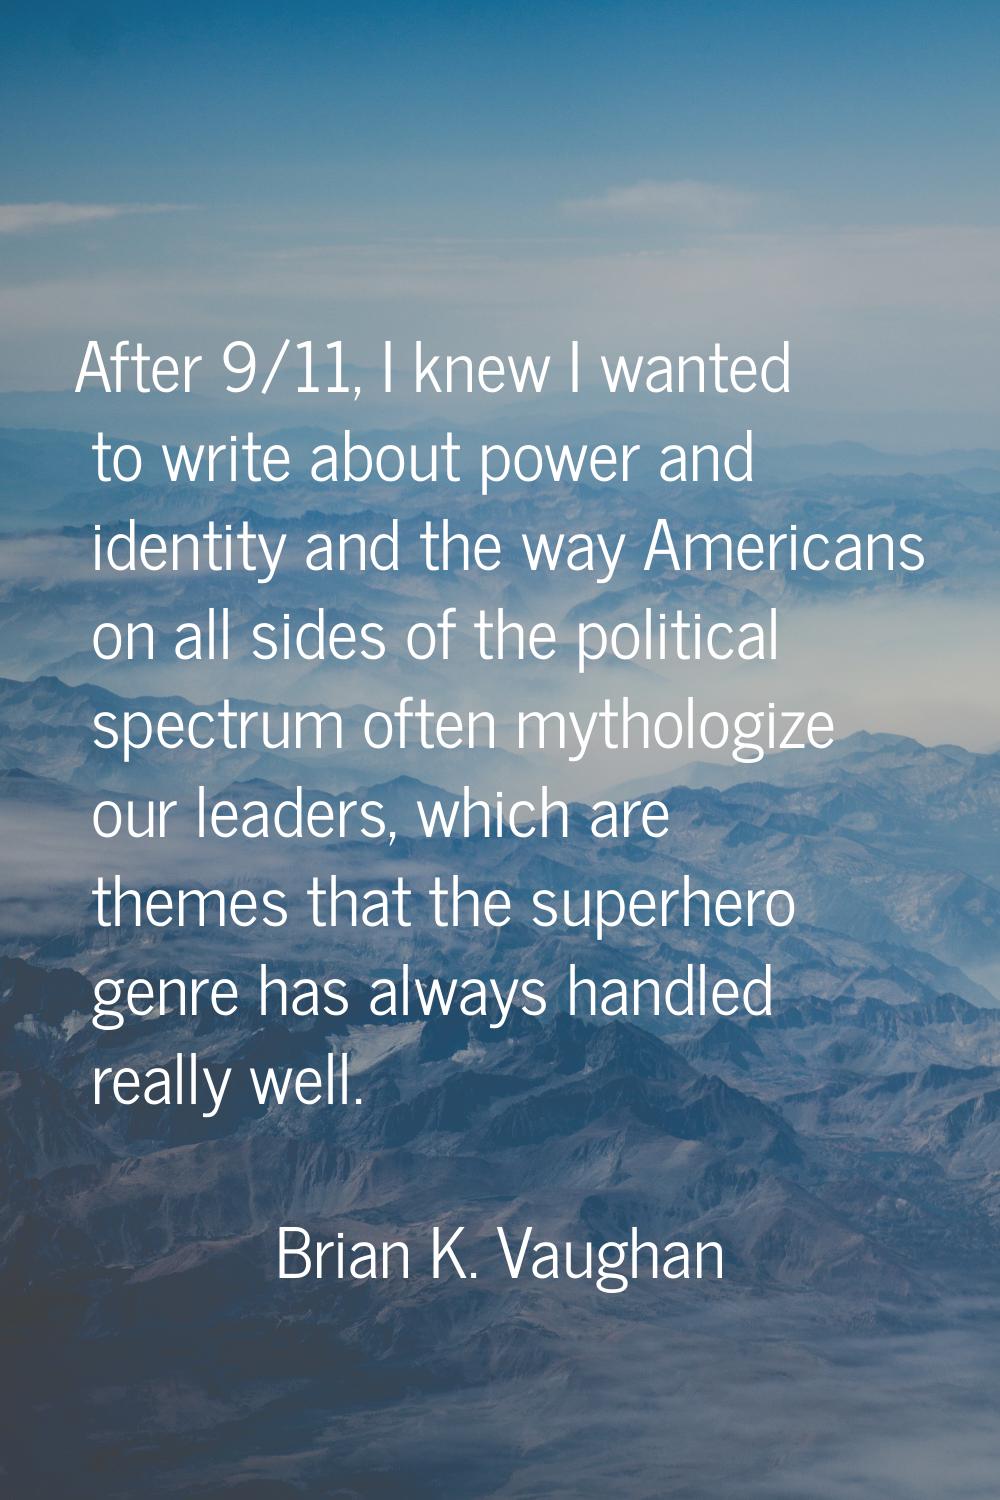 After 9/11, I knew I wanted to write about power and identity and the way Americans on all sides of